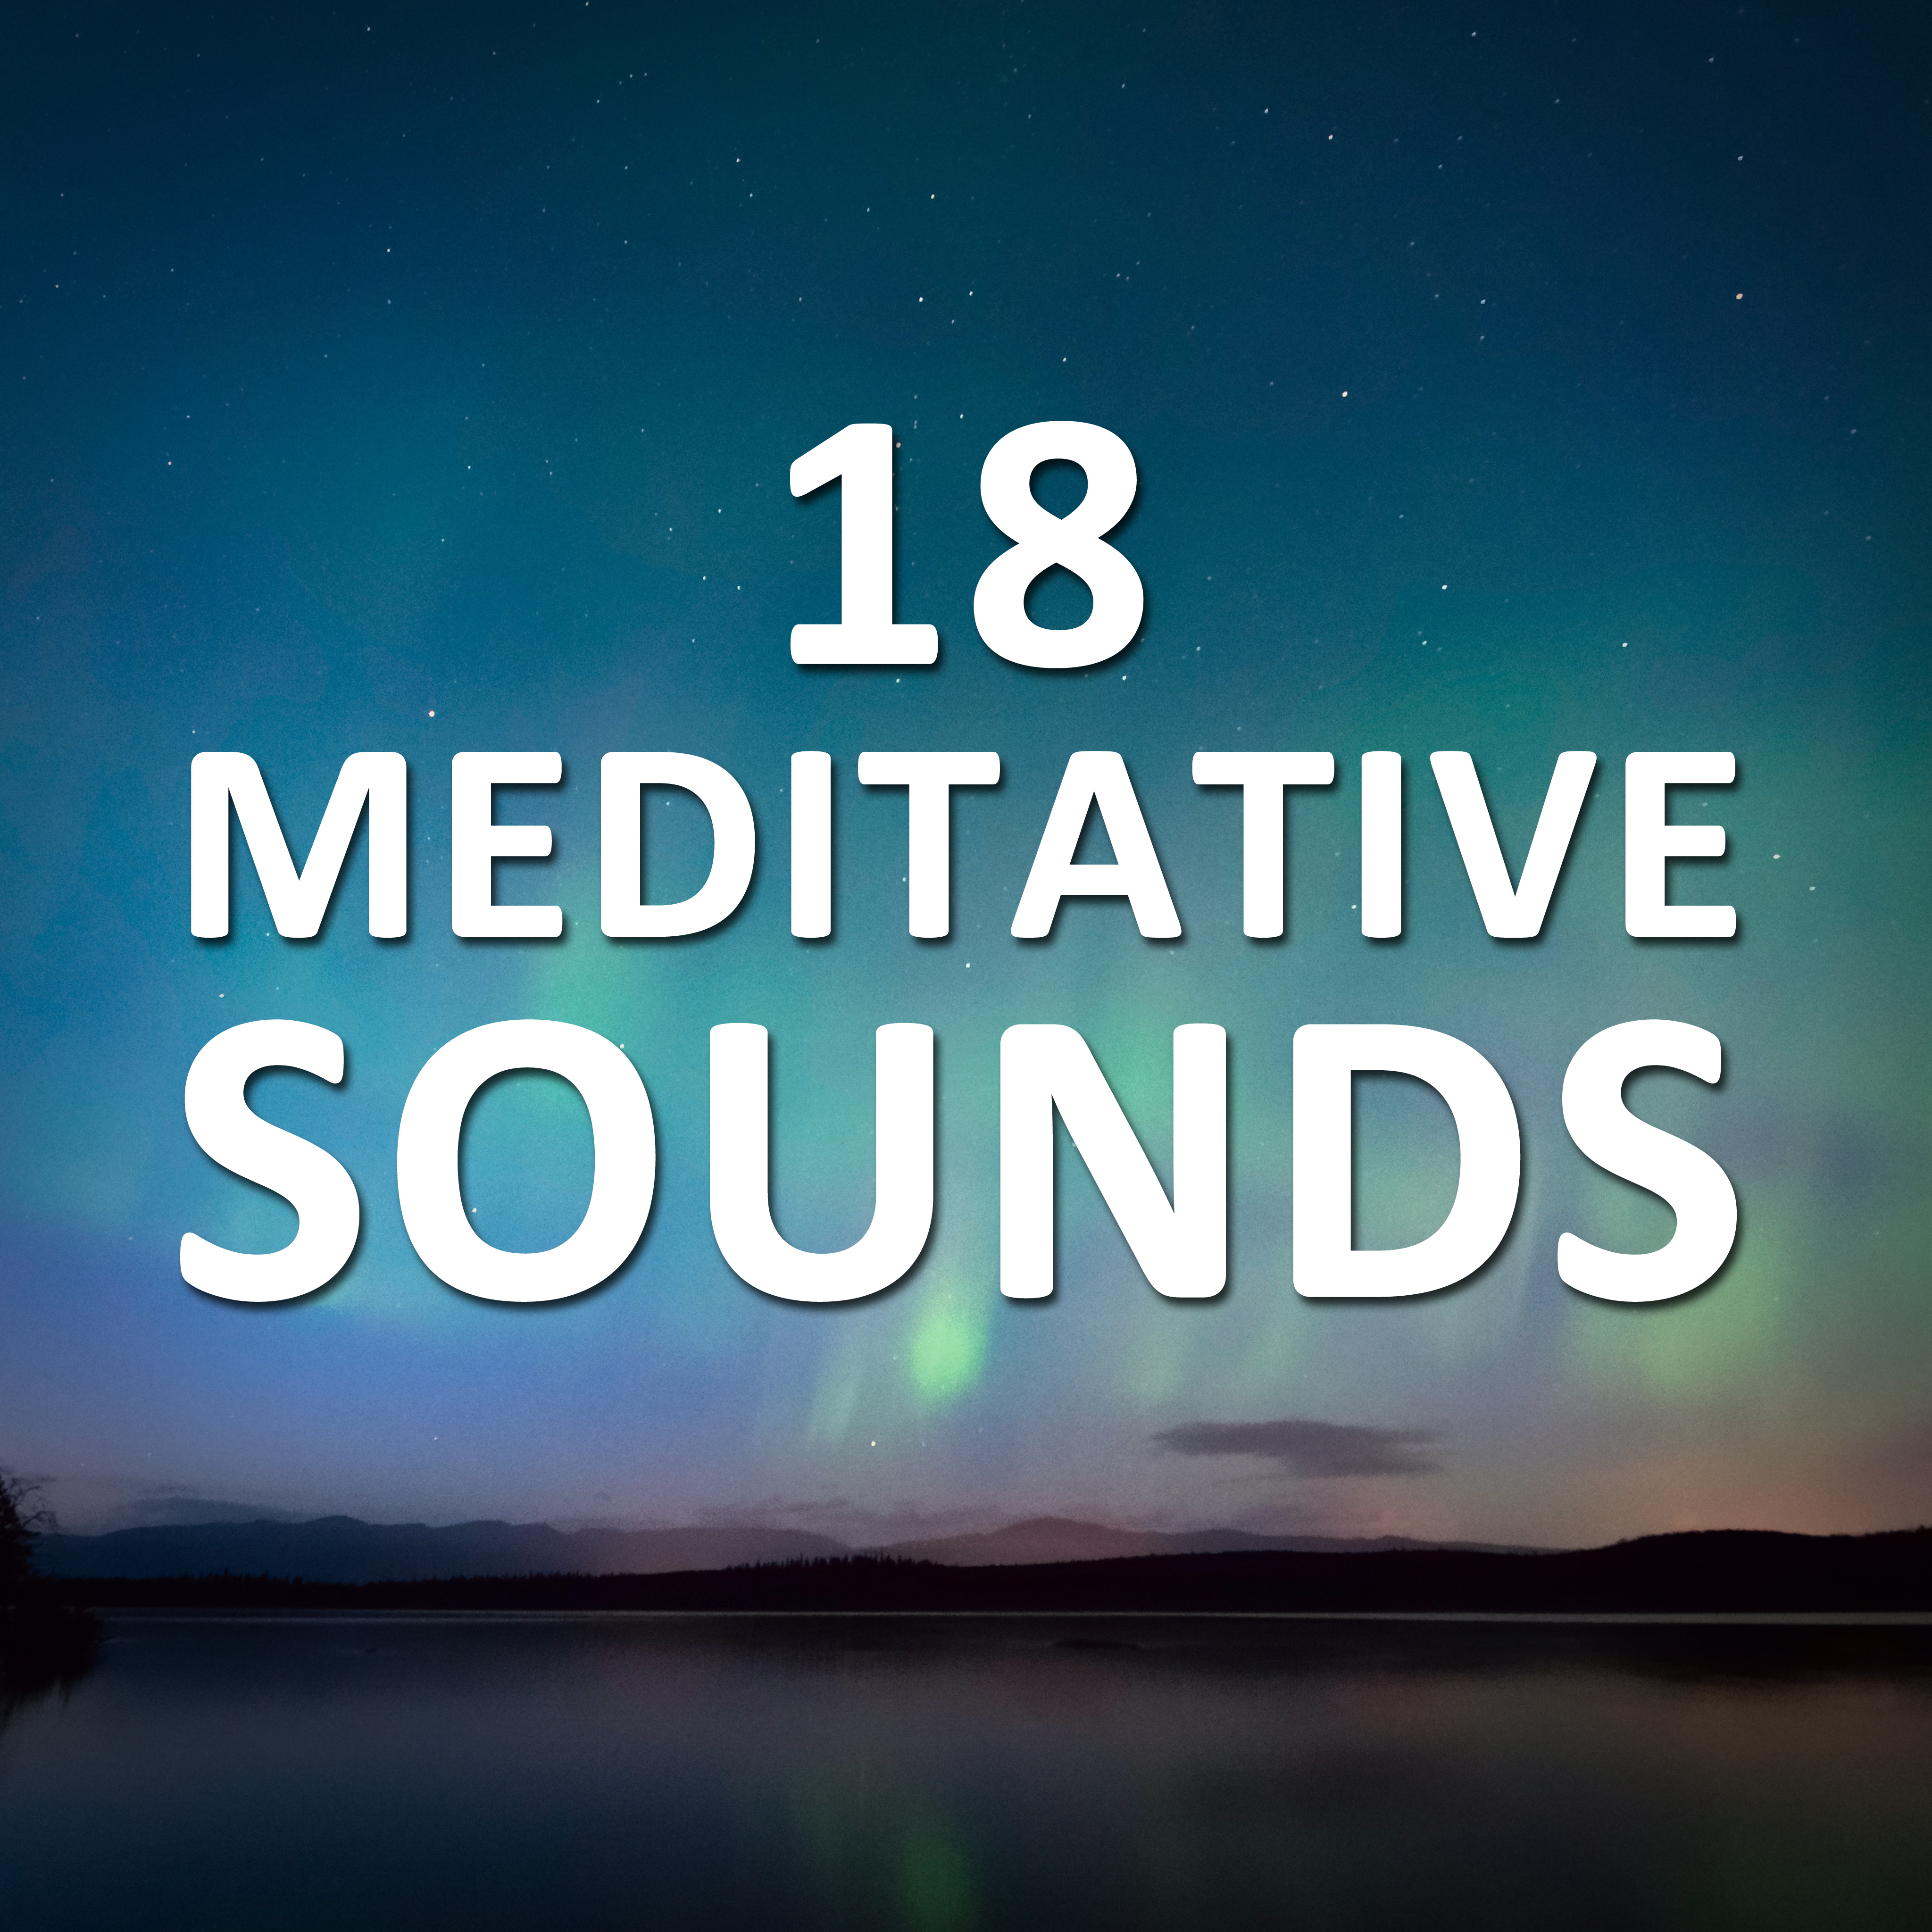 18 Meditative Sounds - Theta and Delta Waves for Mindfulness